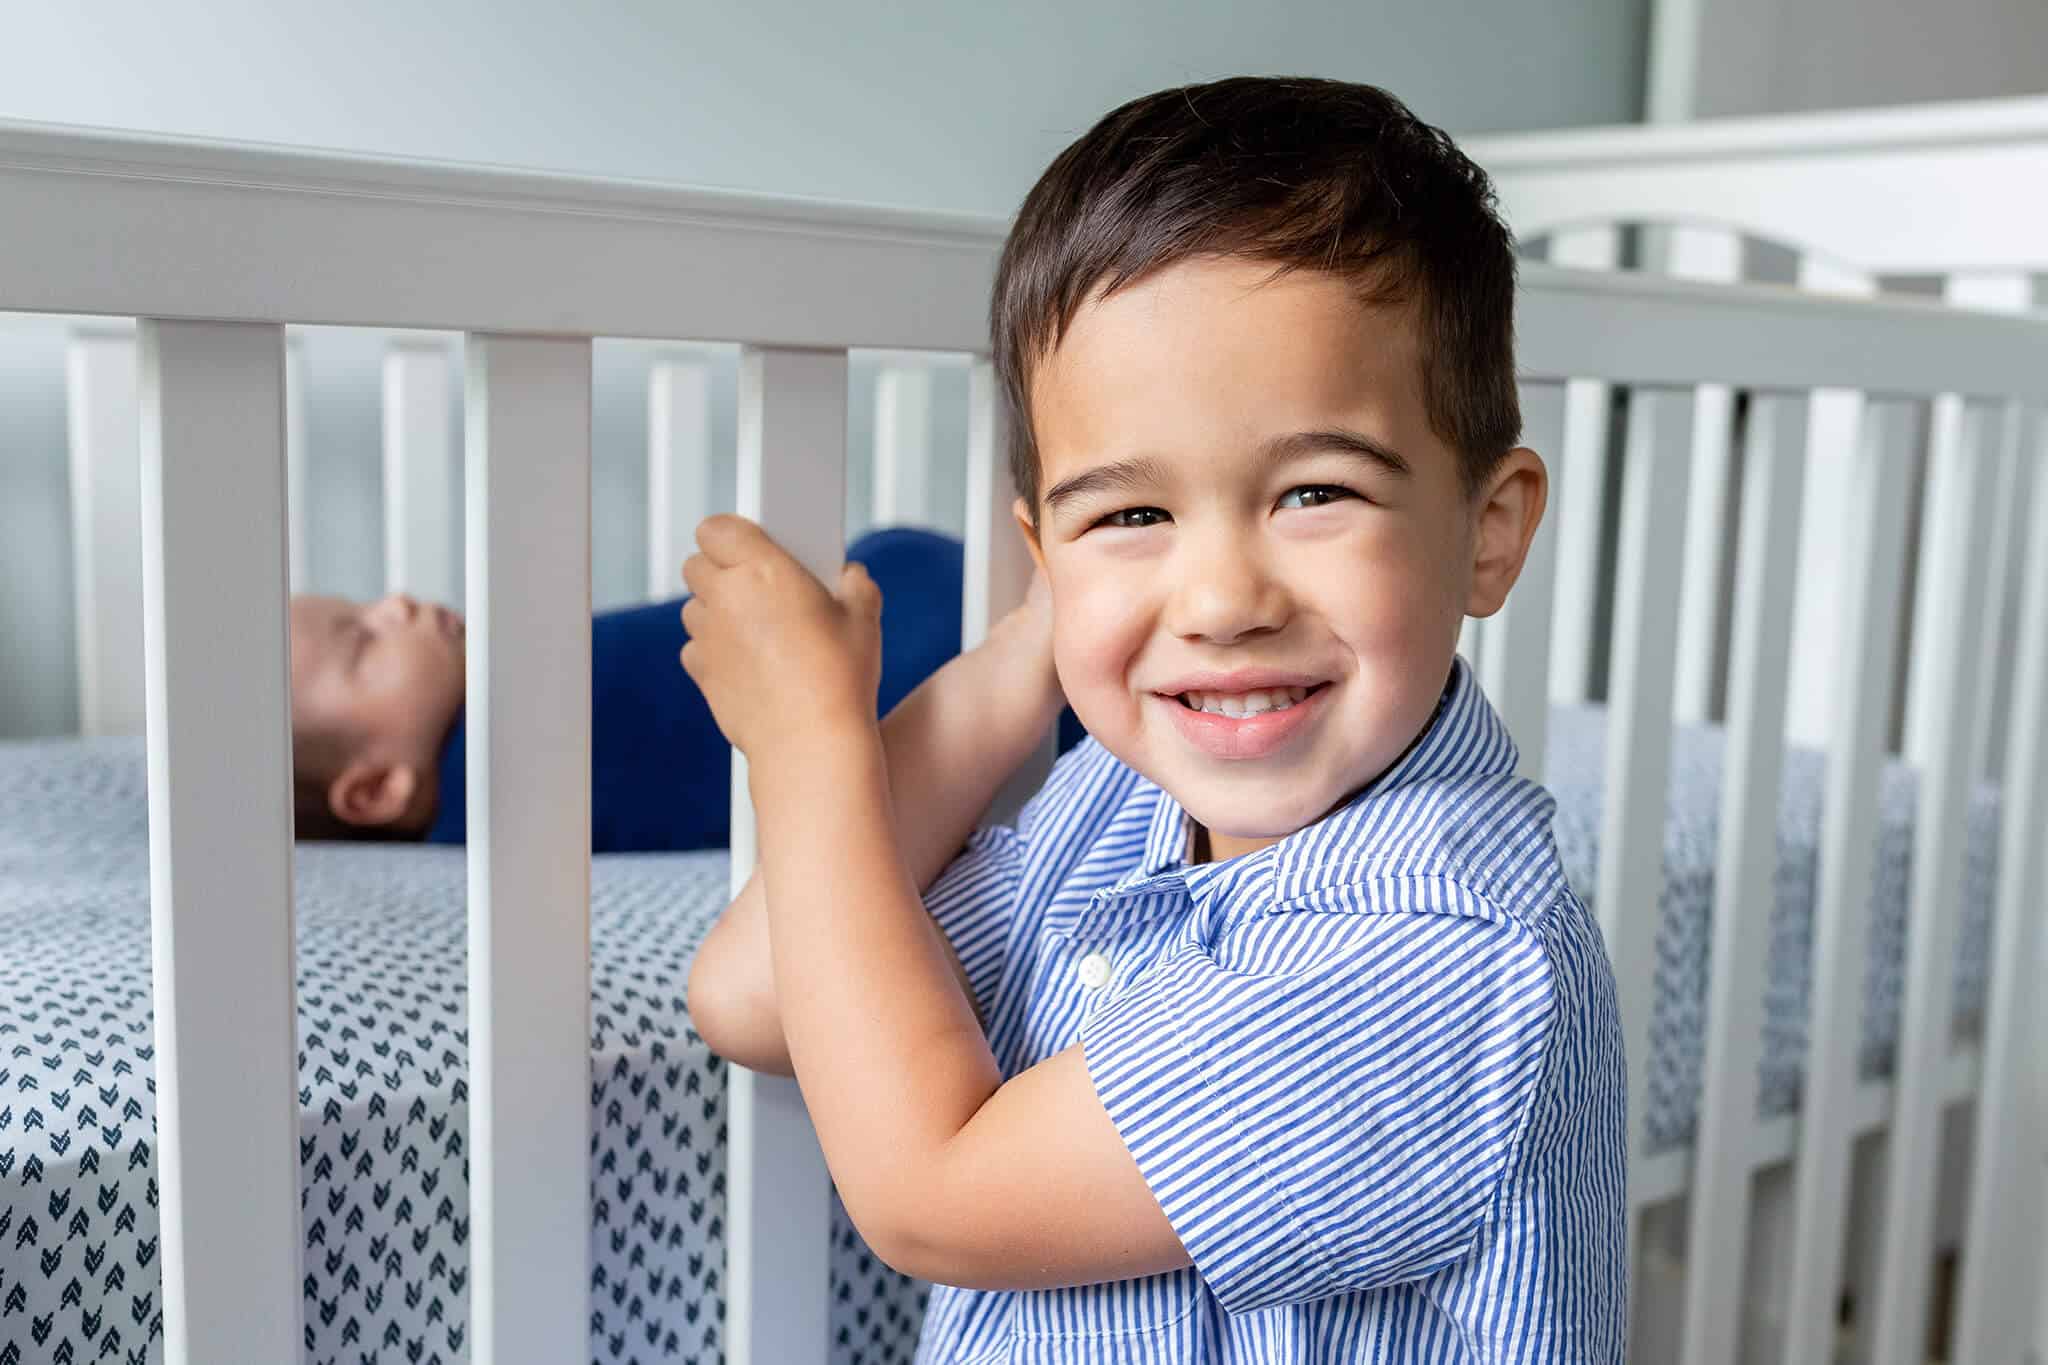 A blog about Pediatricare of Northern Virginia featuring a boy smiling at the camera and posing in front of his baby brother in a crib.